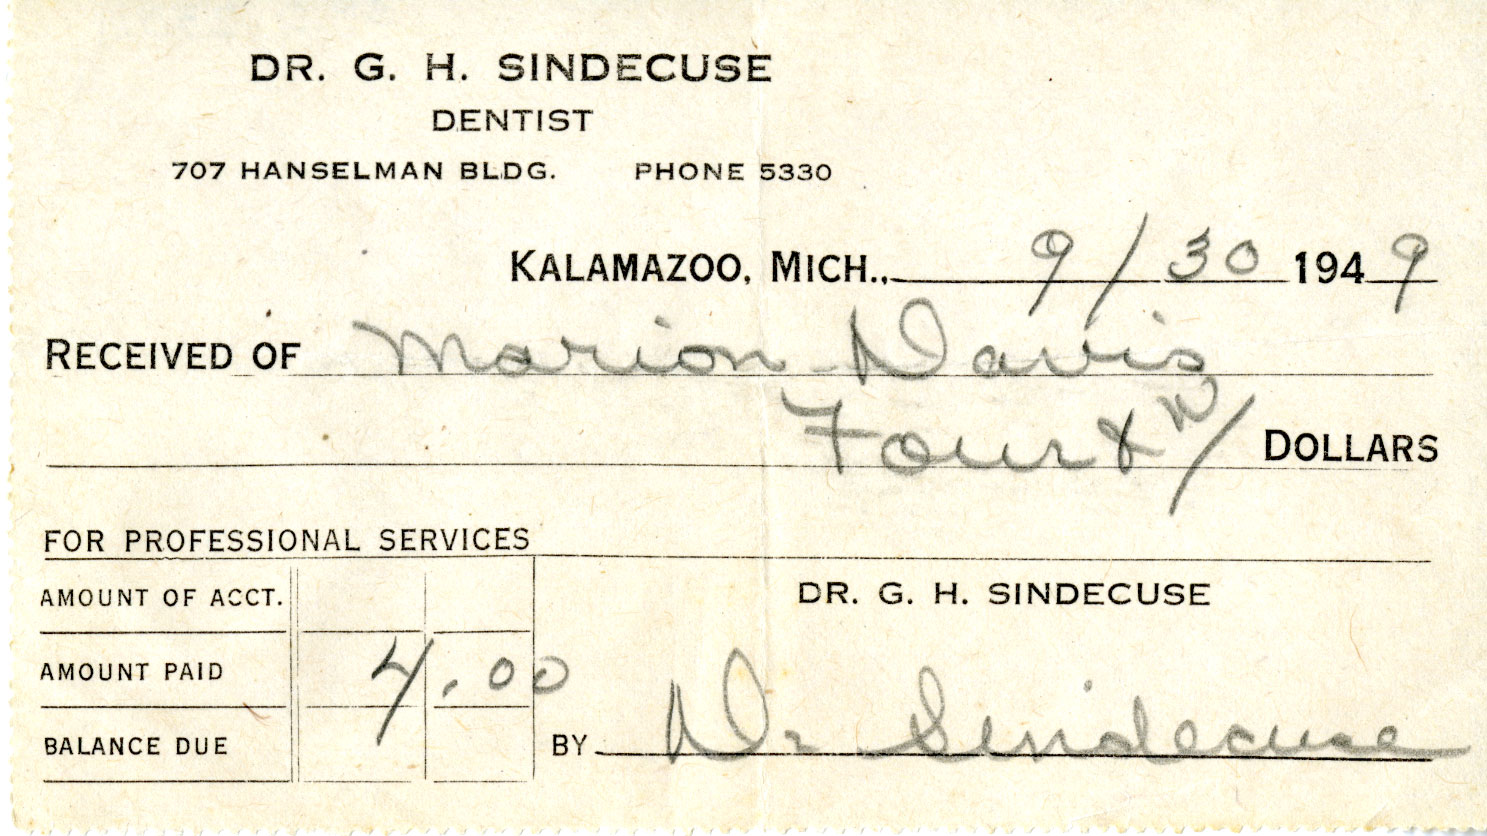   A reciept from Dr. Sindecuse's practice dated September 30, 1942  